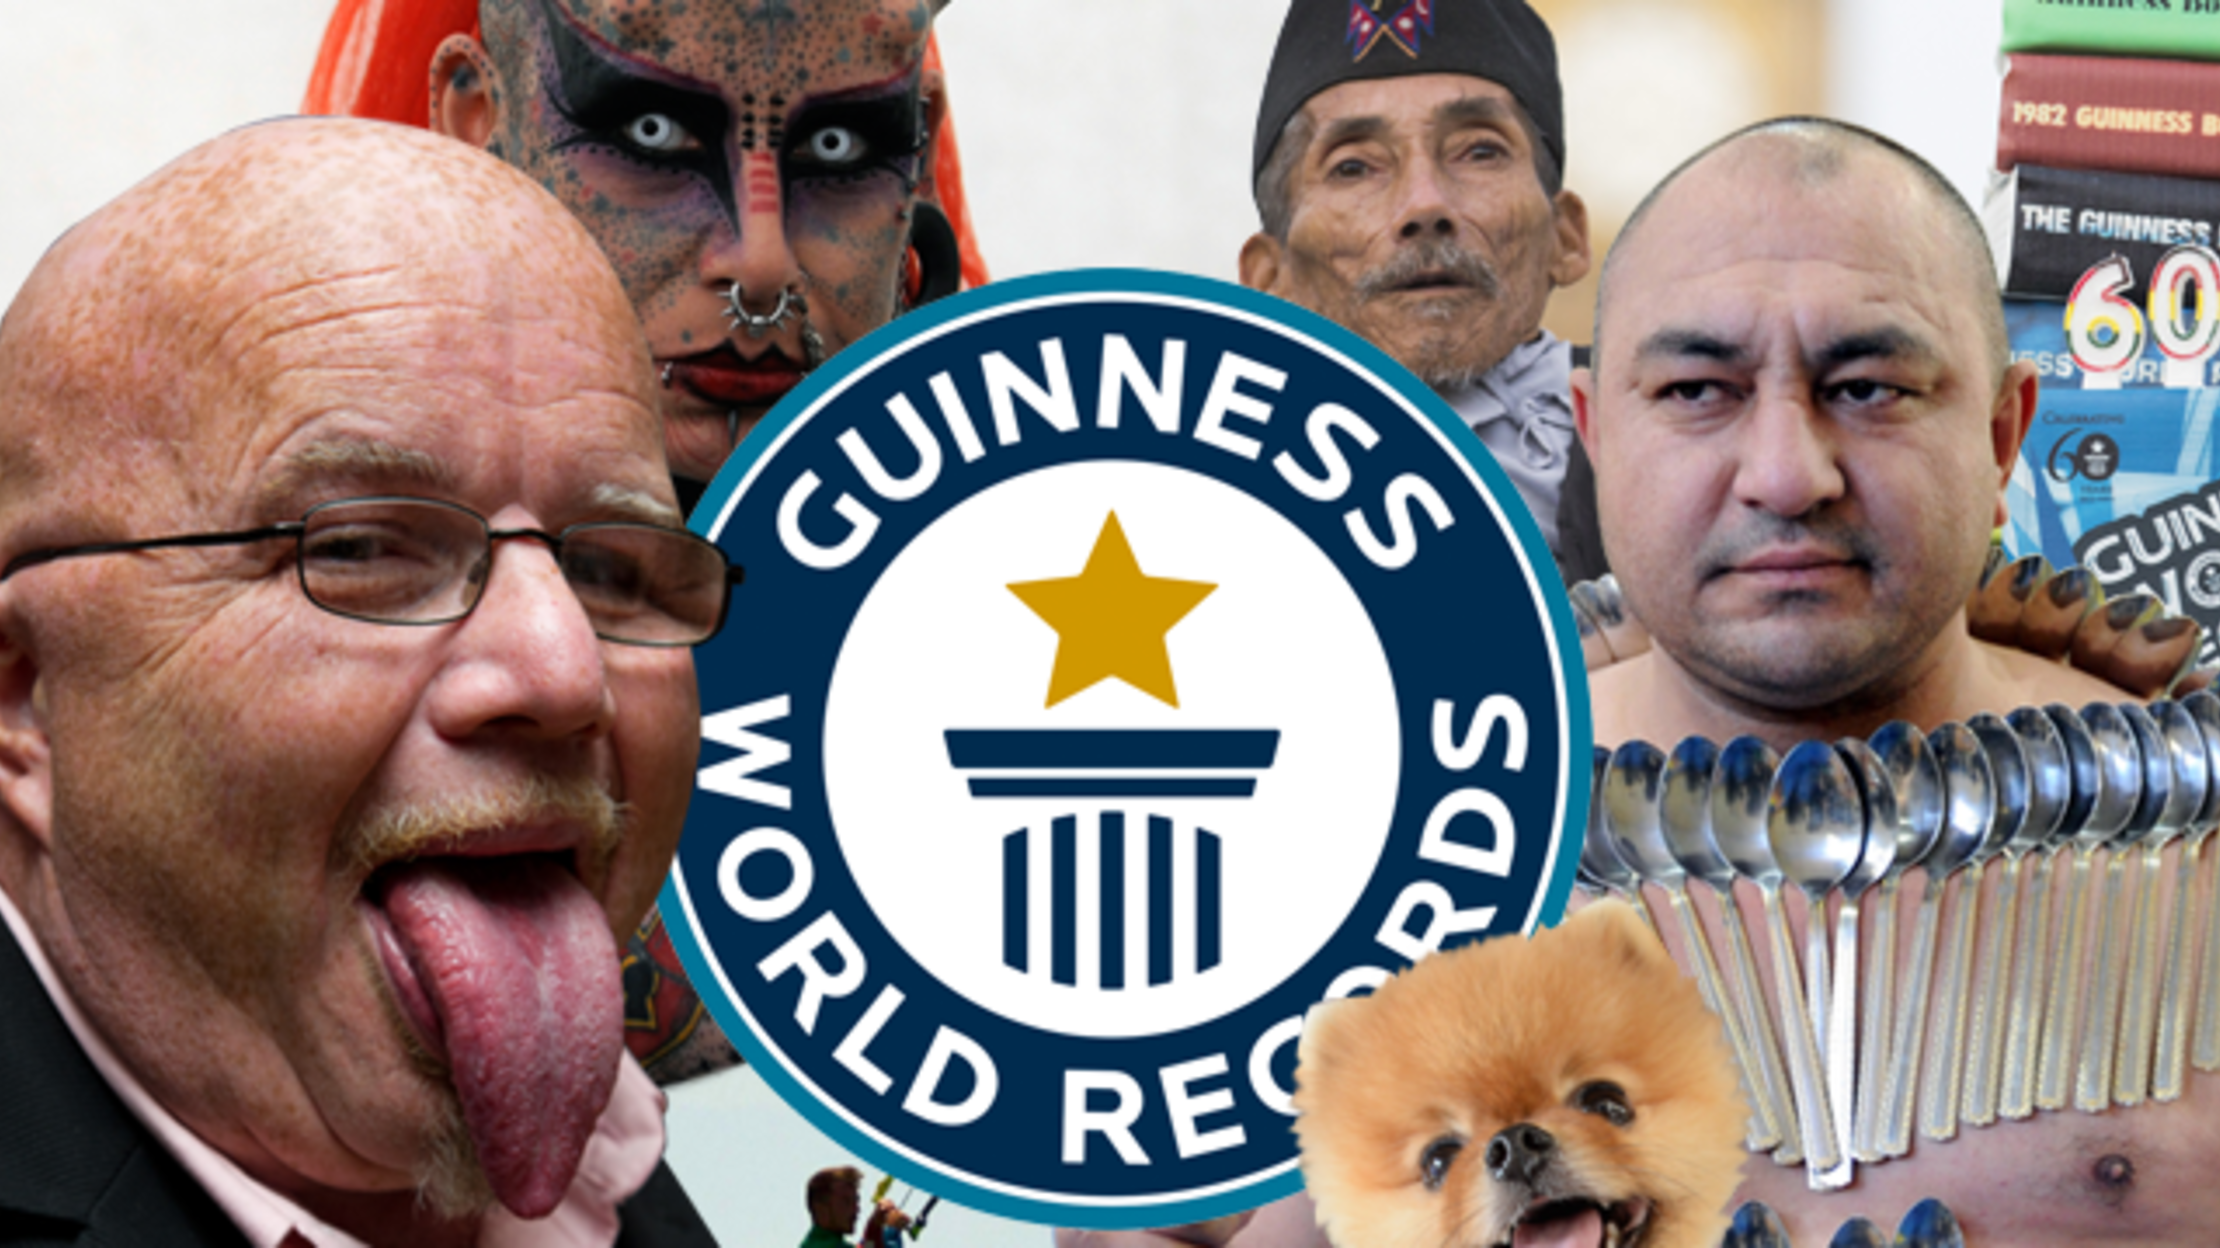 presentation about guinness world records